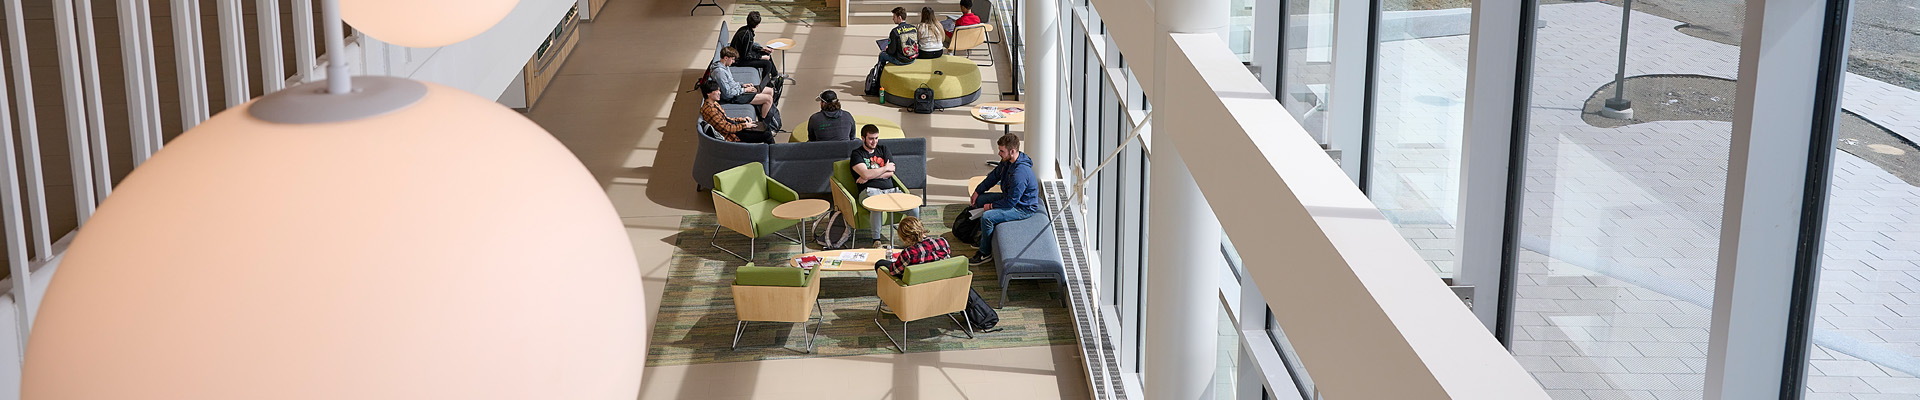 Interior view of Harold Alfond Hall where students are seated, talking and studying